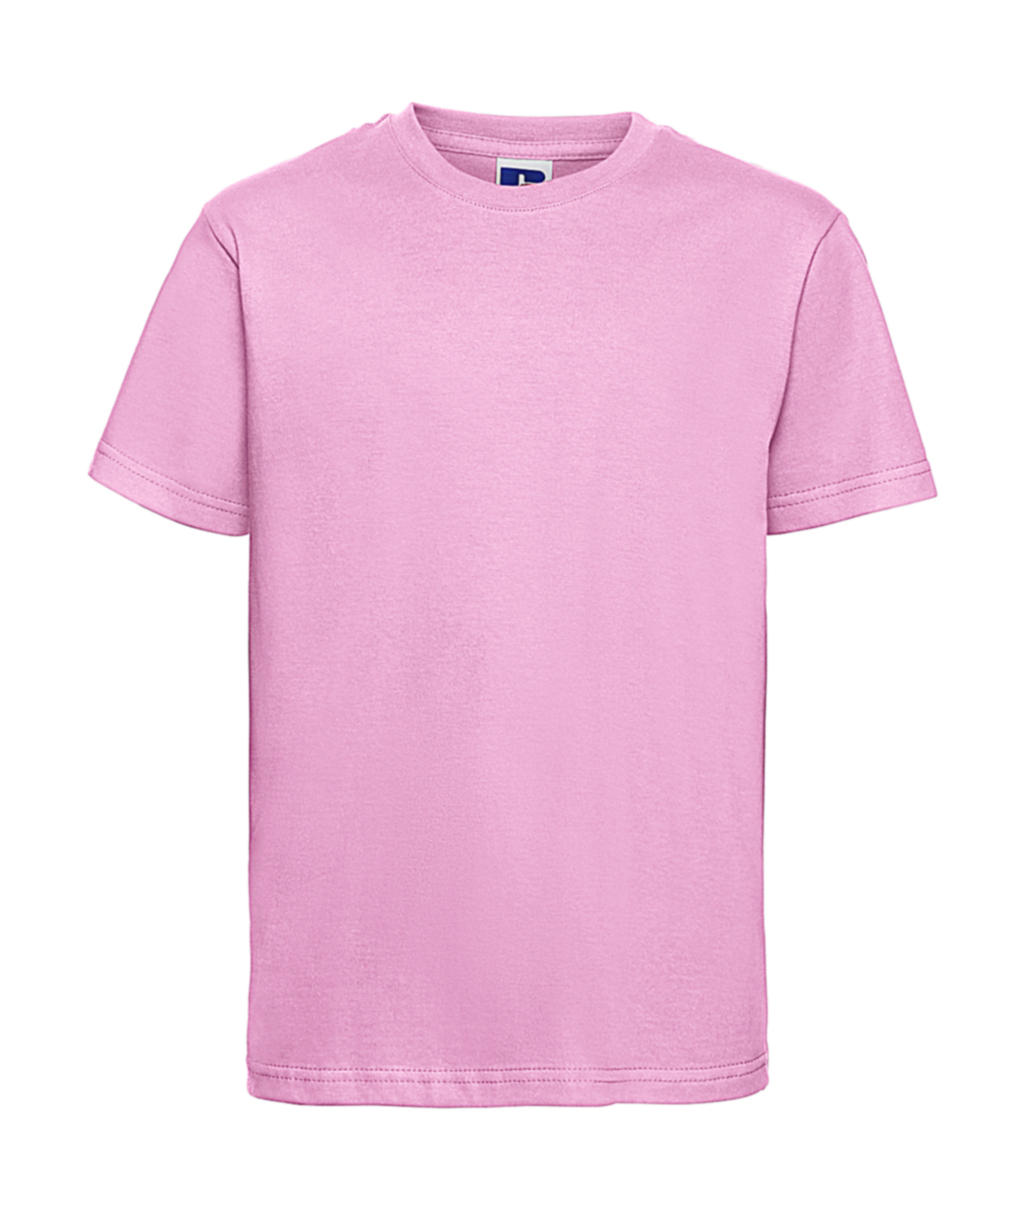  Kids Slim T-Shirt in Farbe Candy Pink